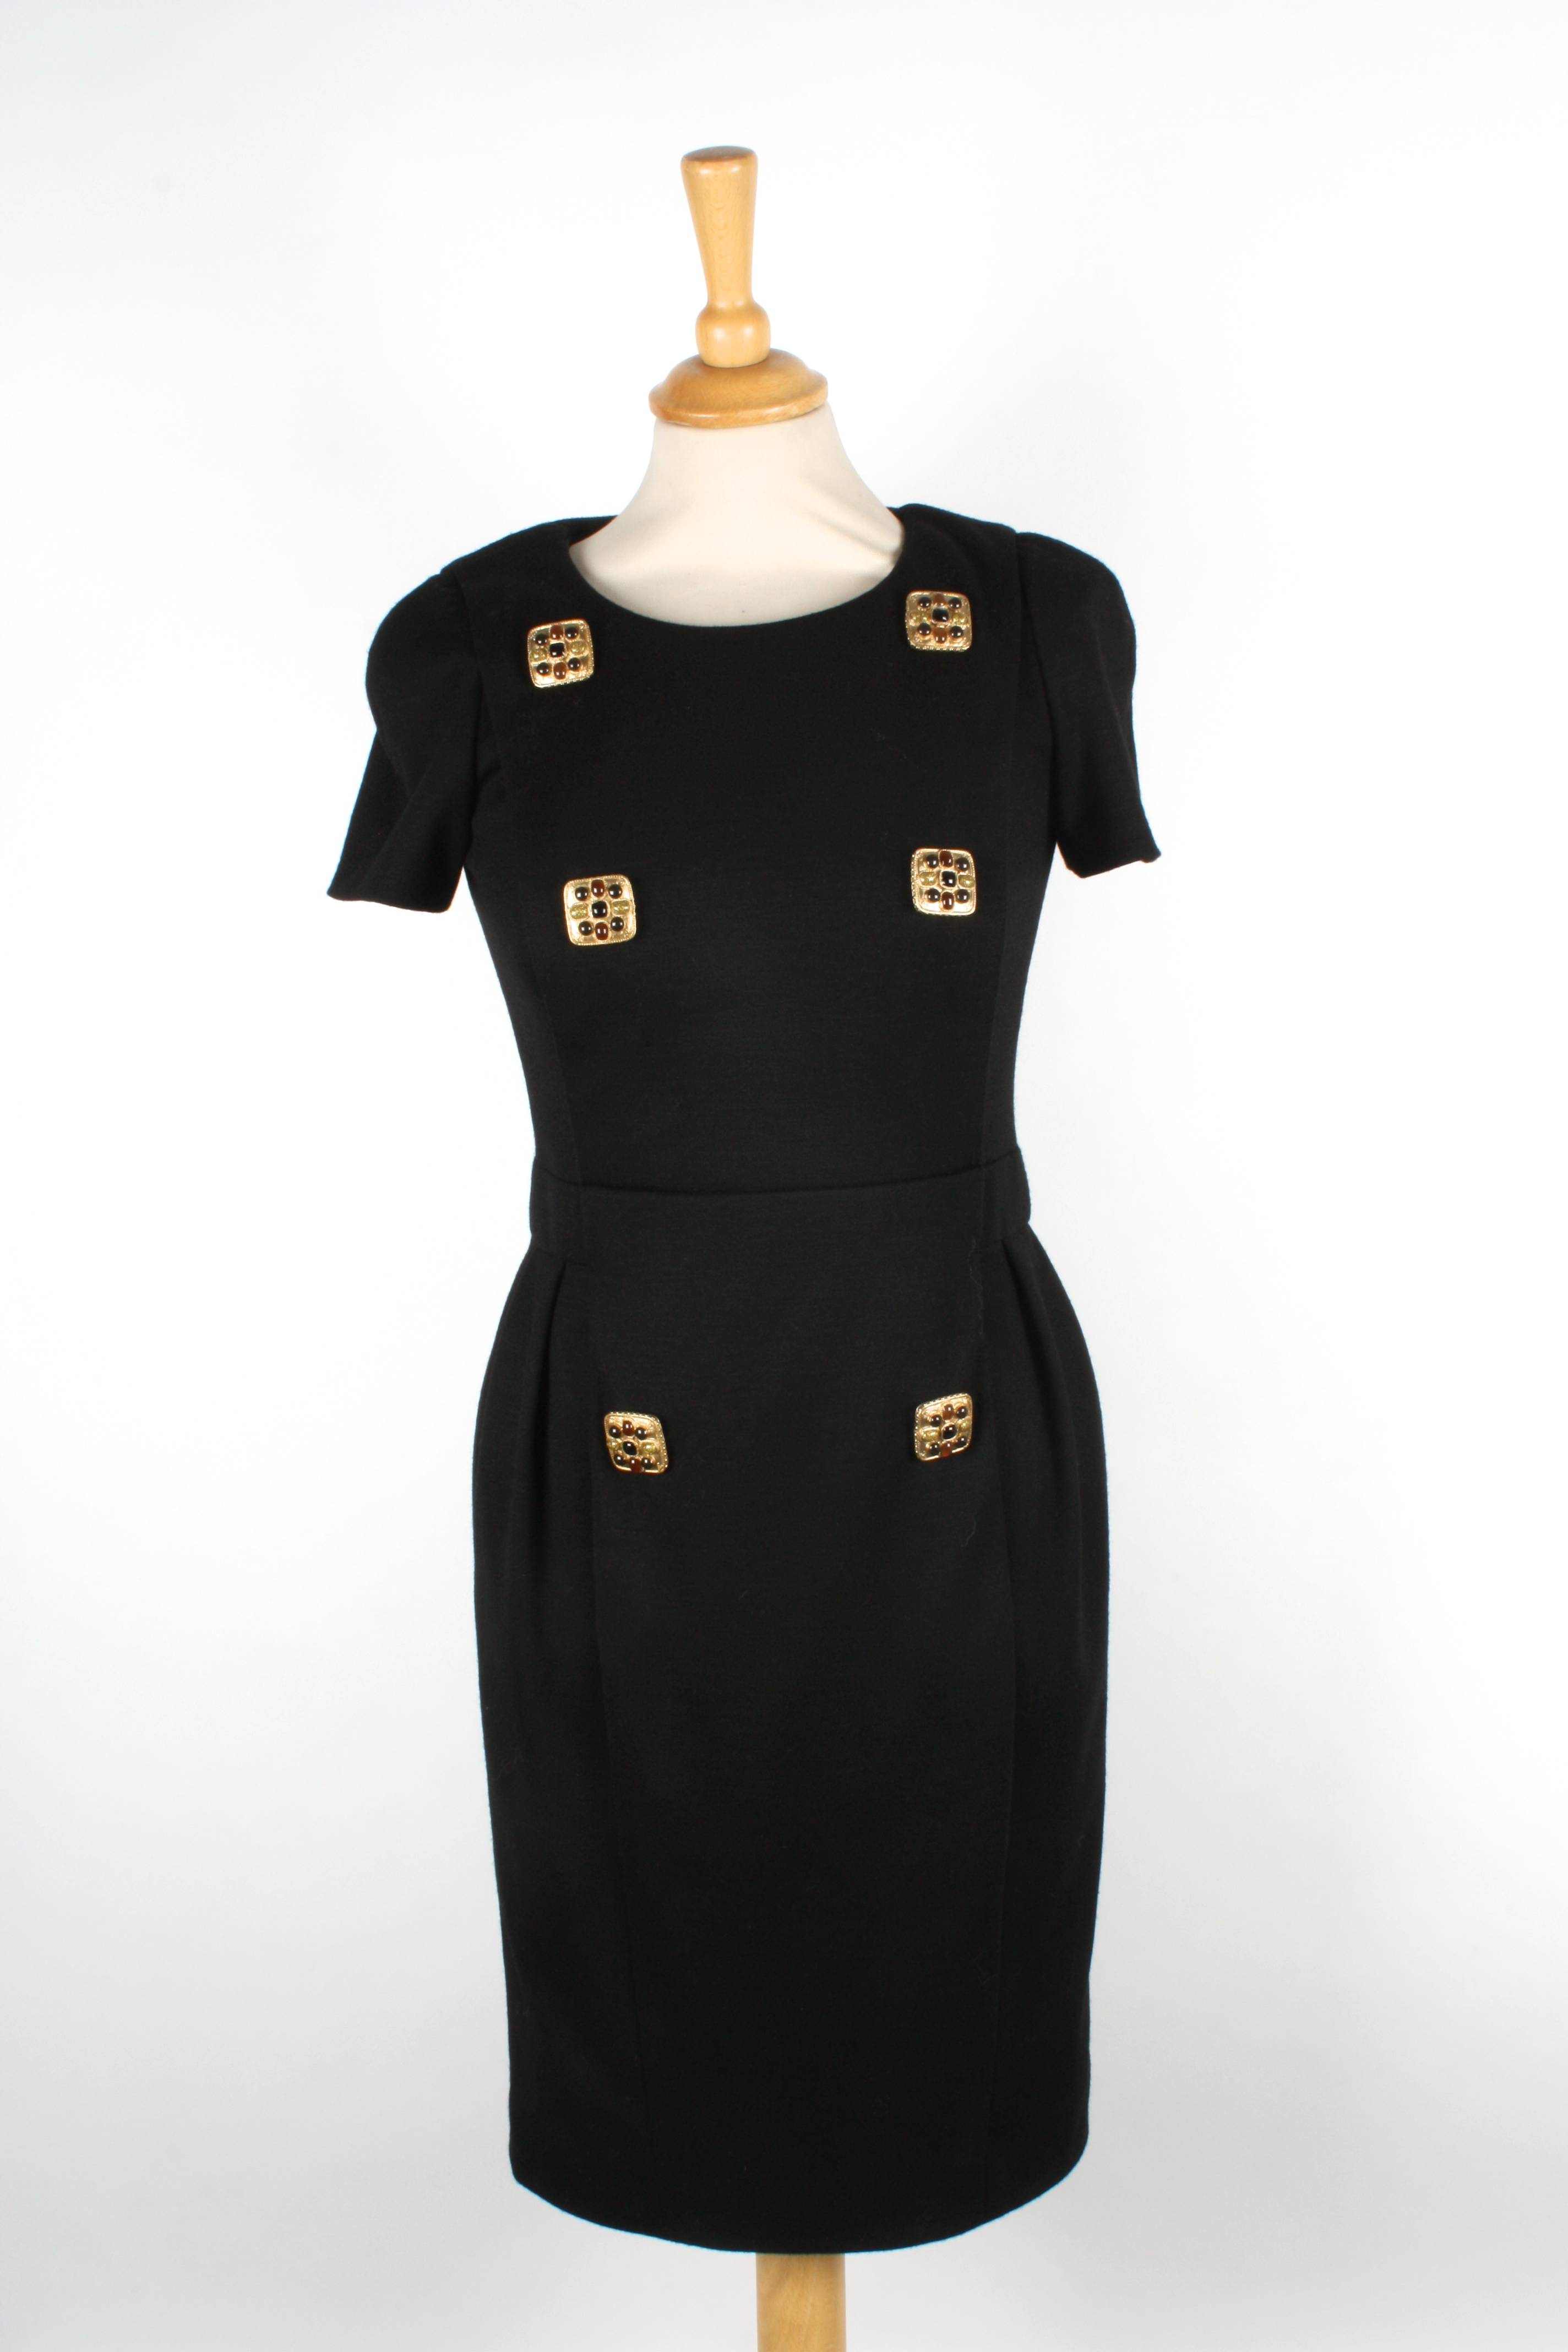 Two Chanel dresses
the first wool black dress with short sleeves, and six gilt beaded buttons to